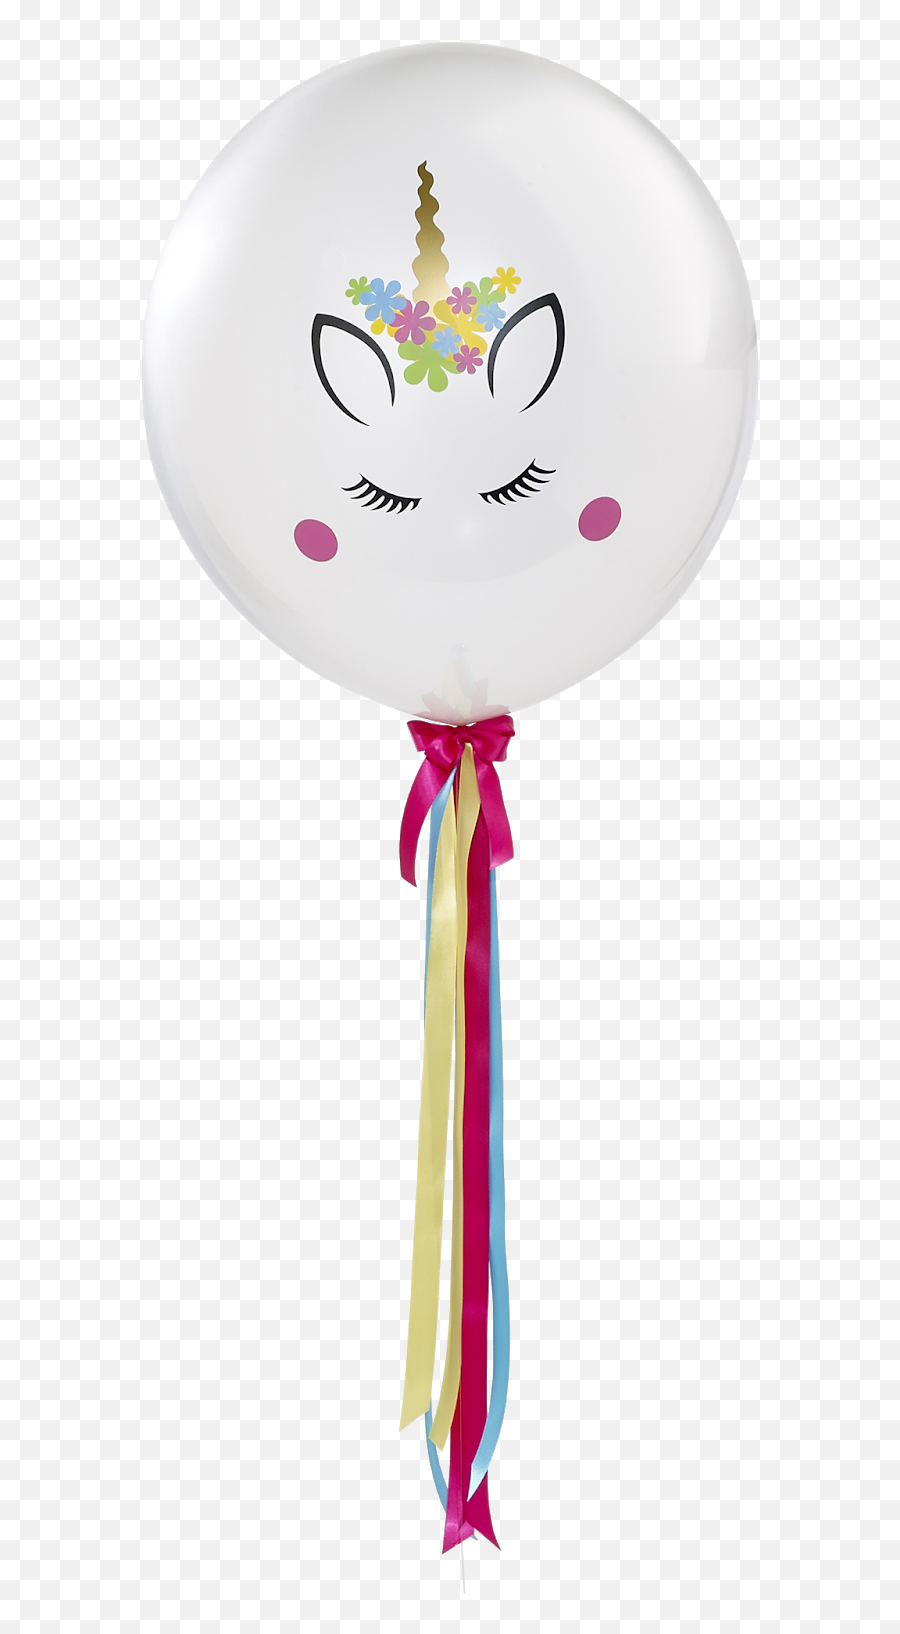 The Very Best Balloon Blog Customising Balloons With Vinyl - Party Supply Emoji,Unicorn Face Clipart